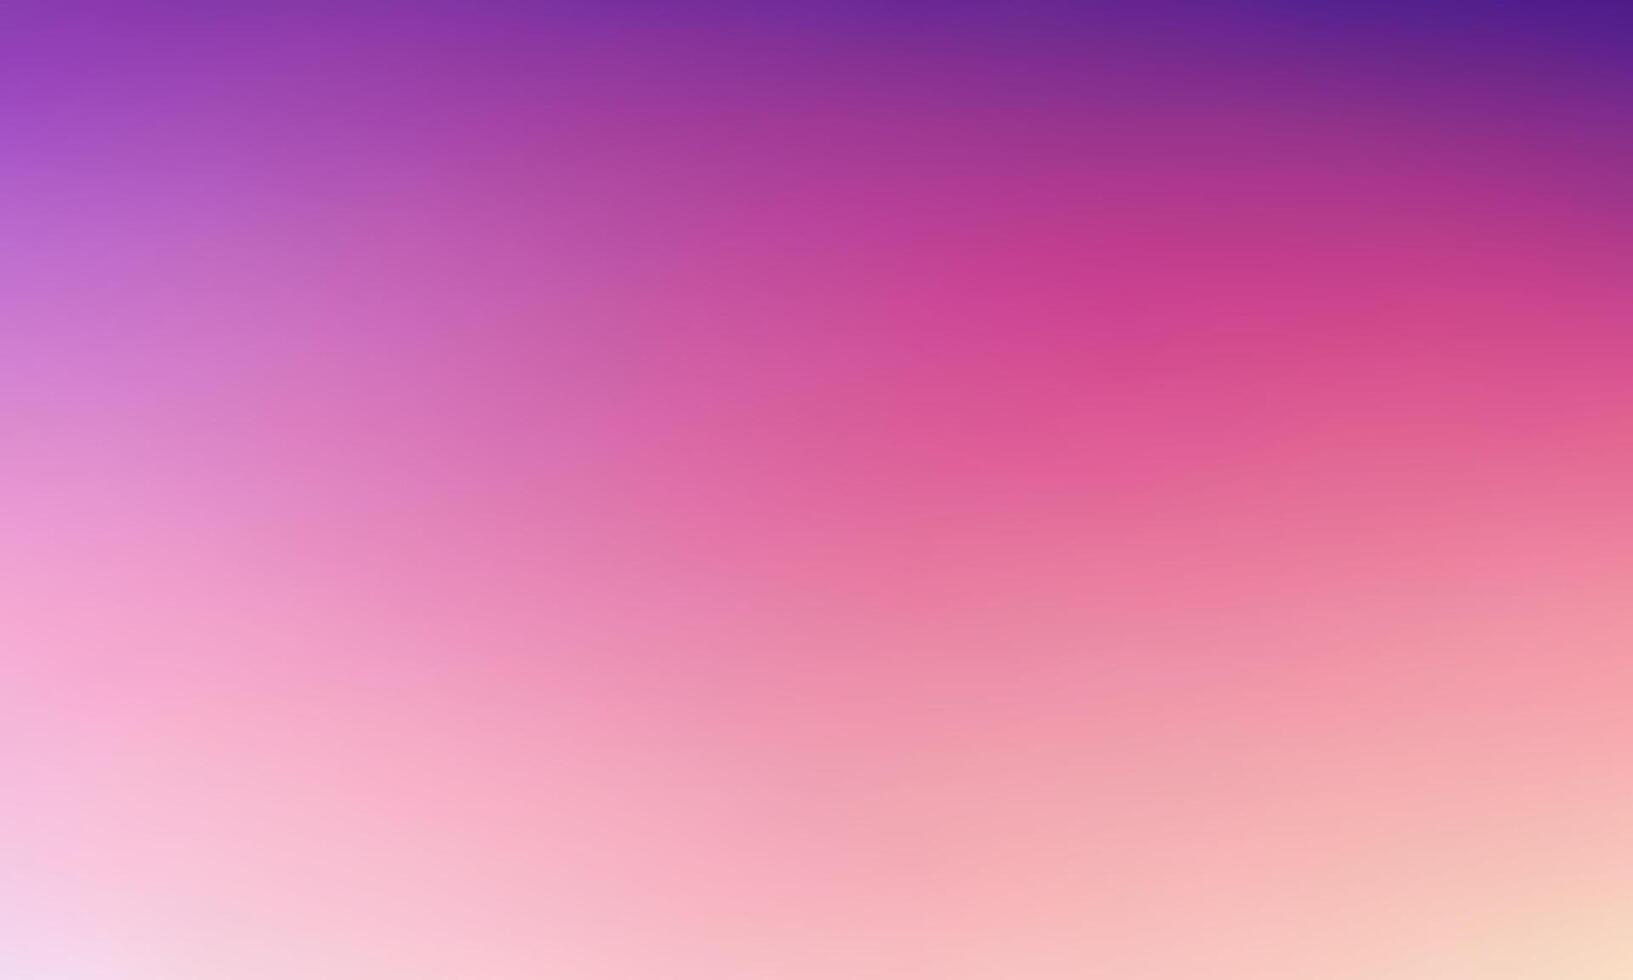 Artistic Soft Pink and Purple Gradient Background vector